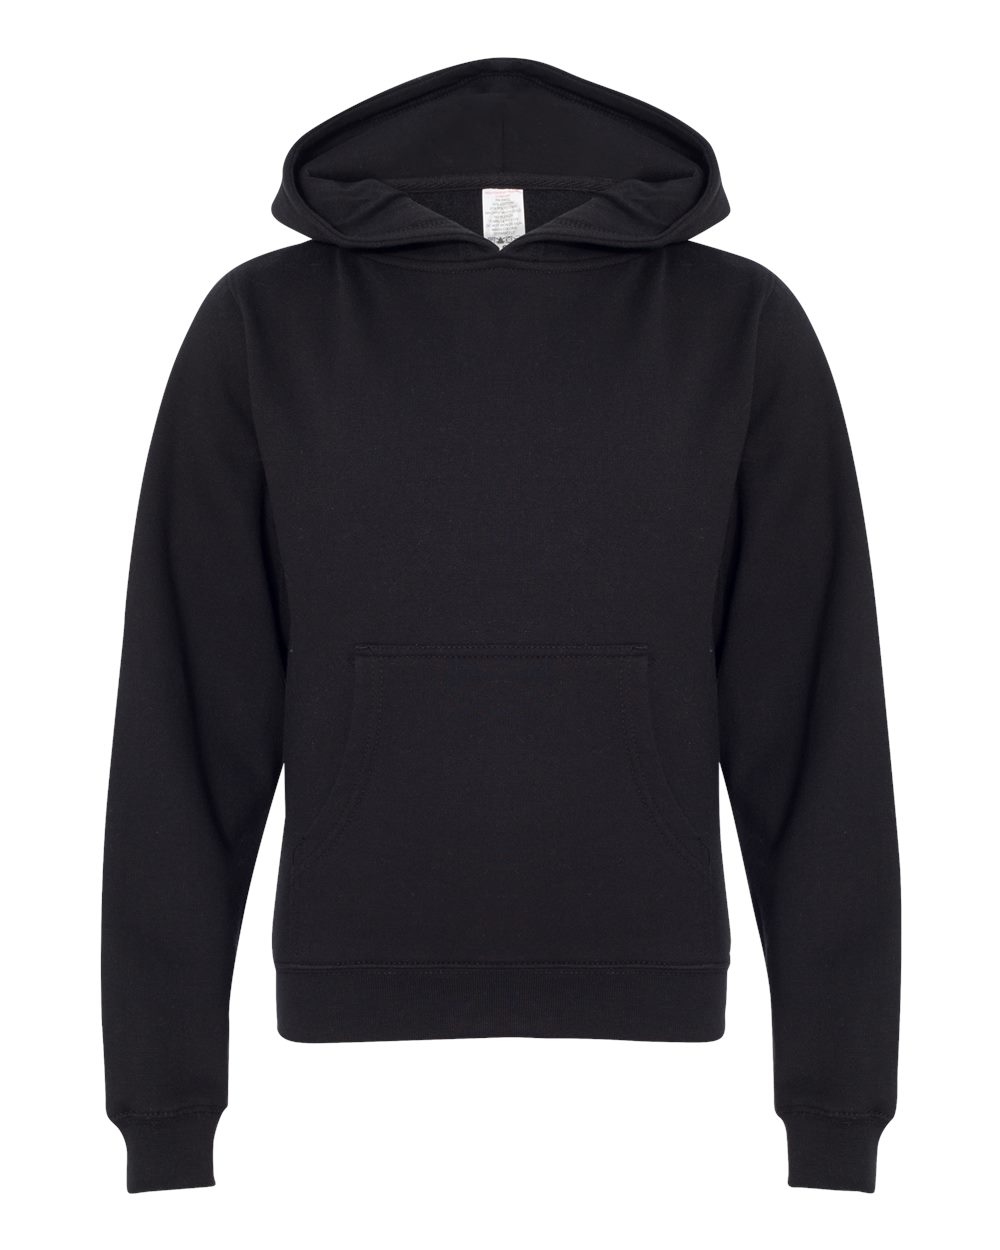 Independent Trading Co. SS4001Y | Youth Midweight Hooded Sweatshirt ...